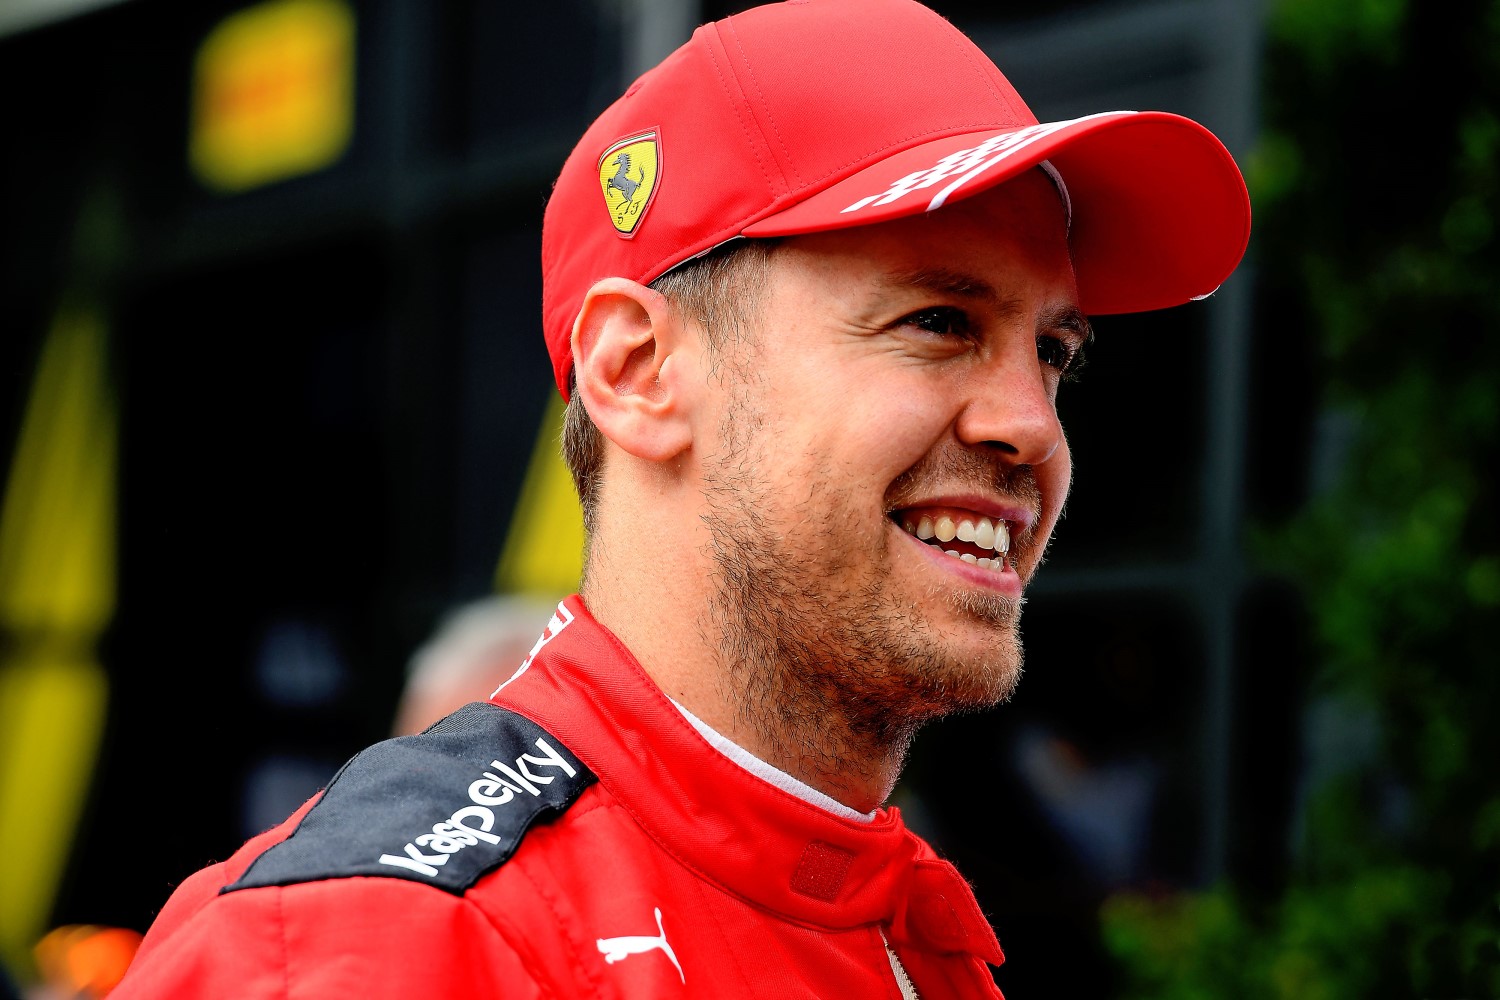 Will Vettel drive a Cowell engine powered Aston Martin in 2022?